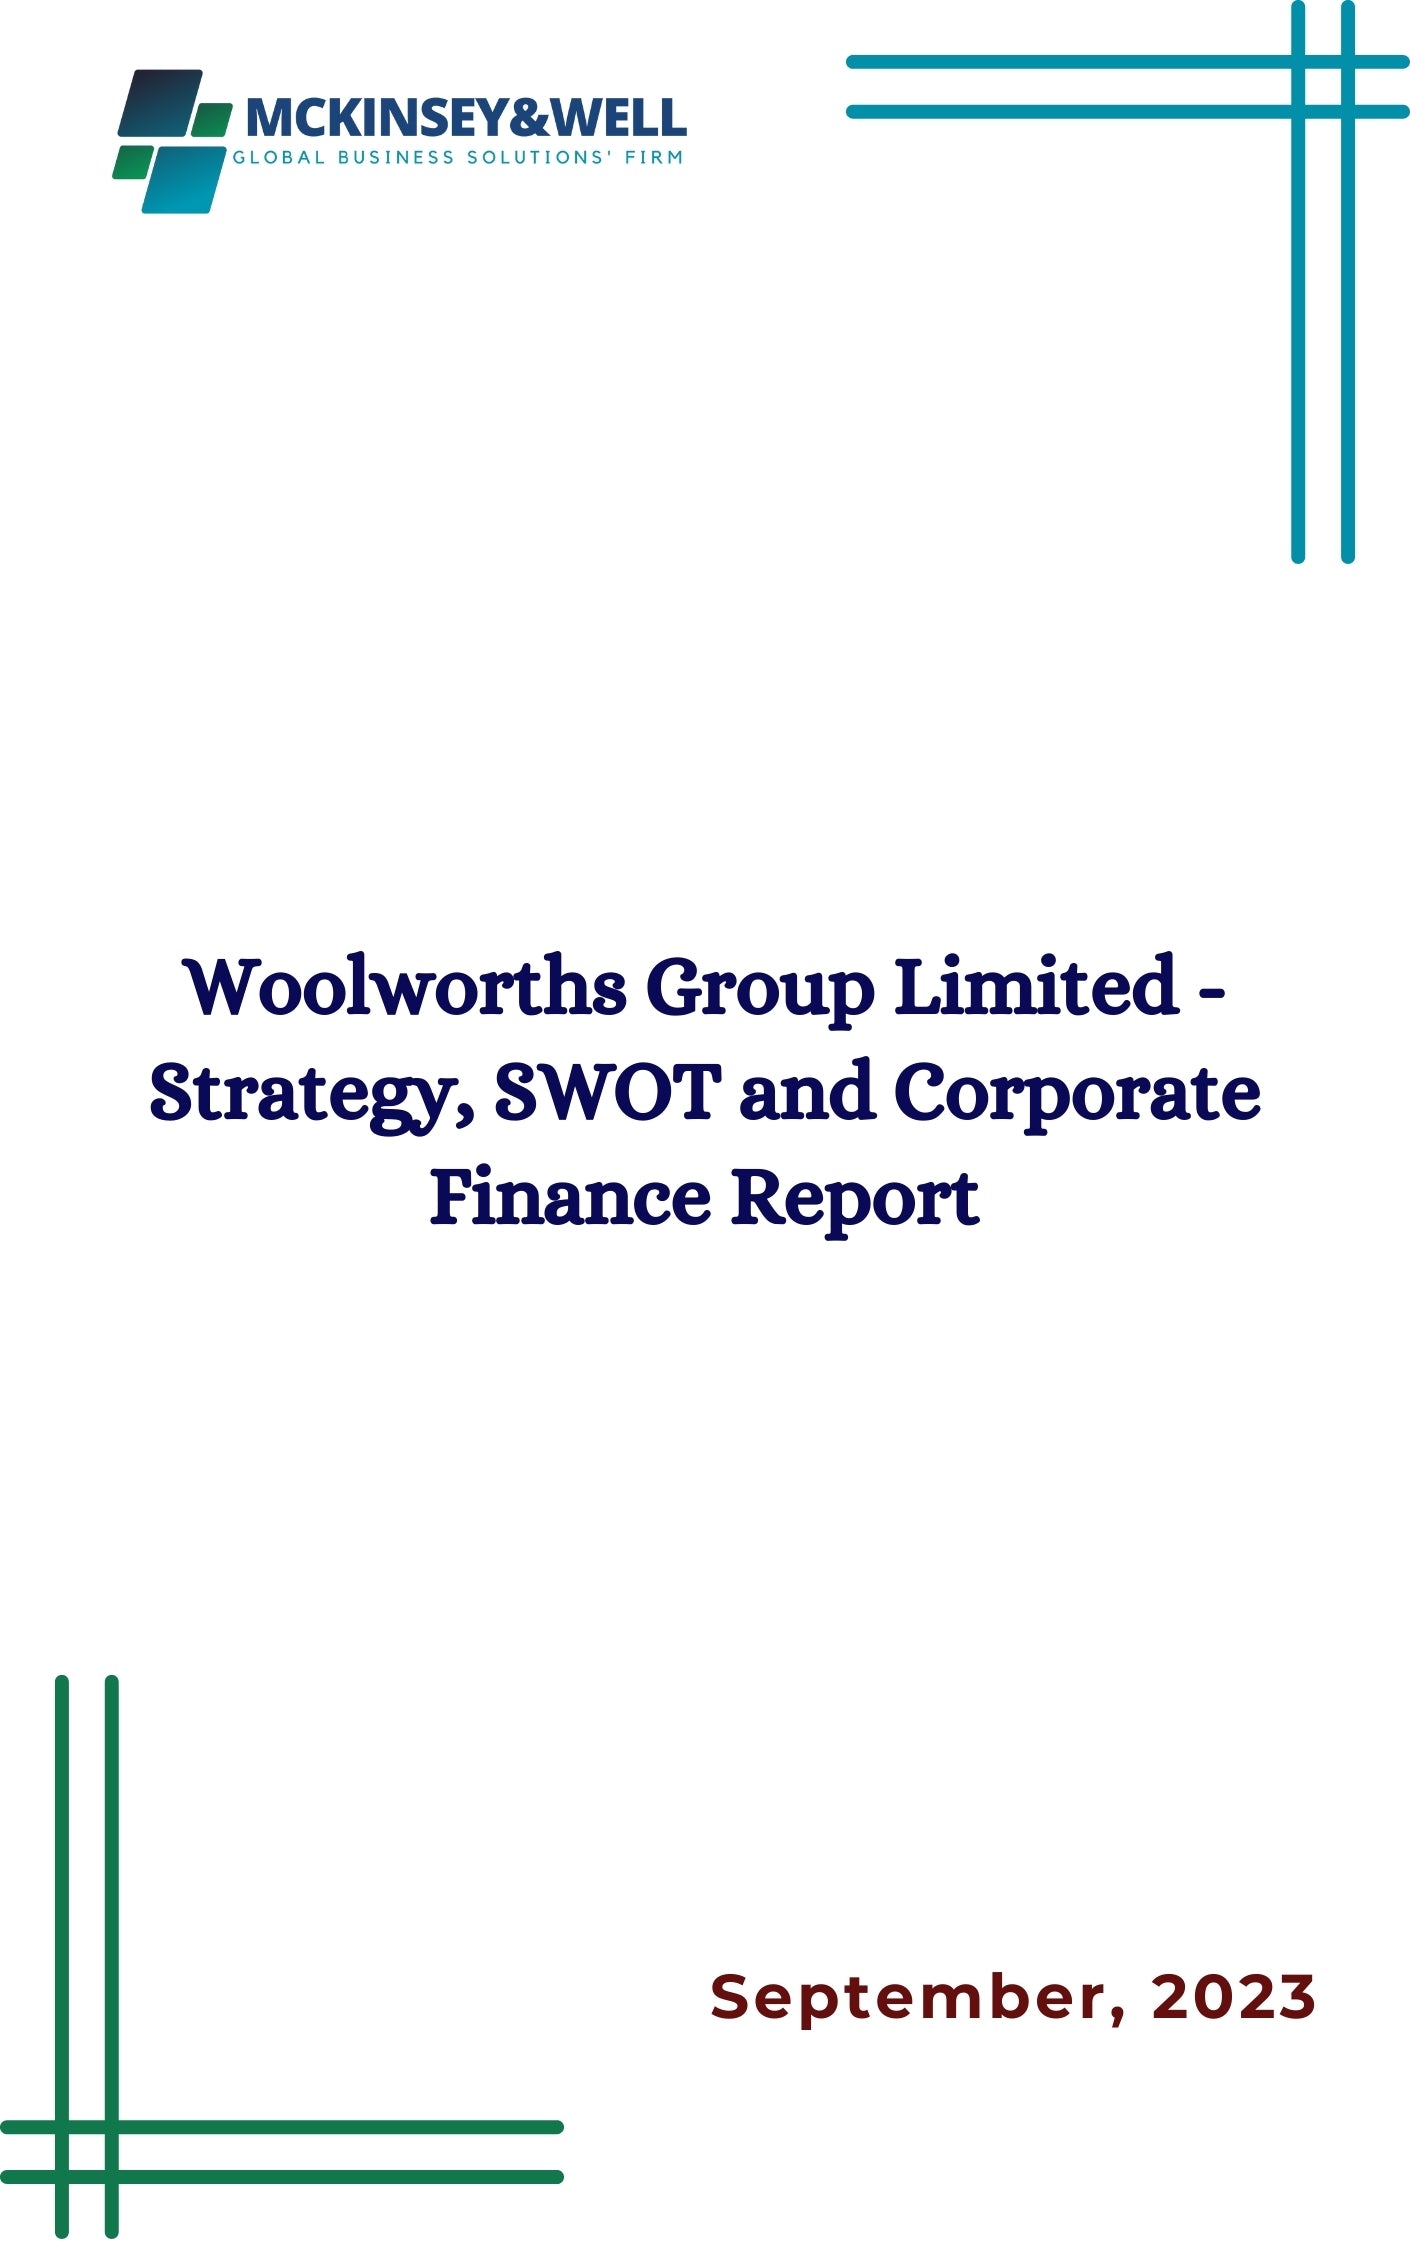 Woolworths Group Limited - Strategy, SWOT and Corporate Finance Report